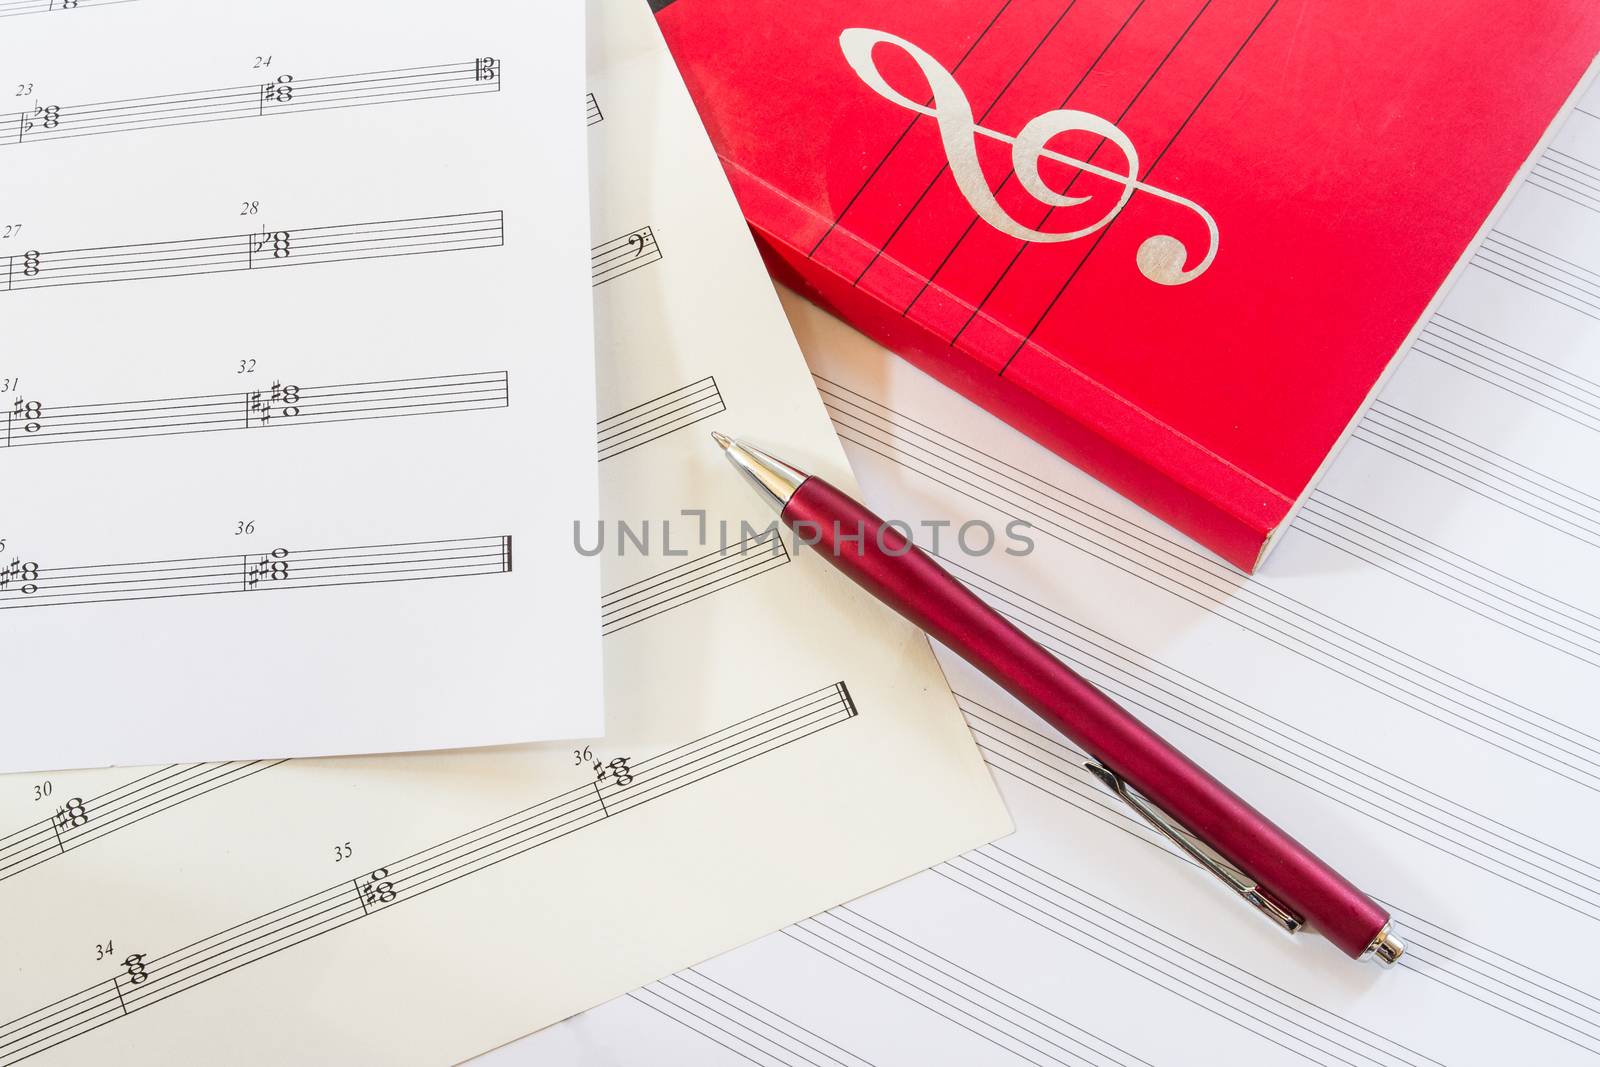 Sheet music with pen and music book